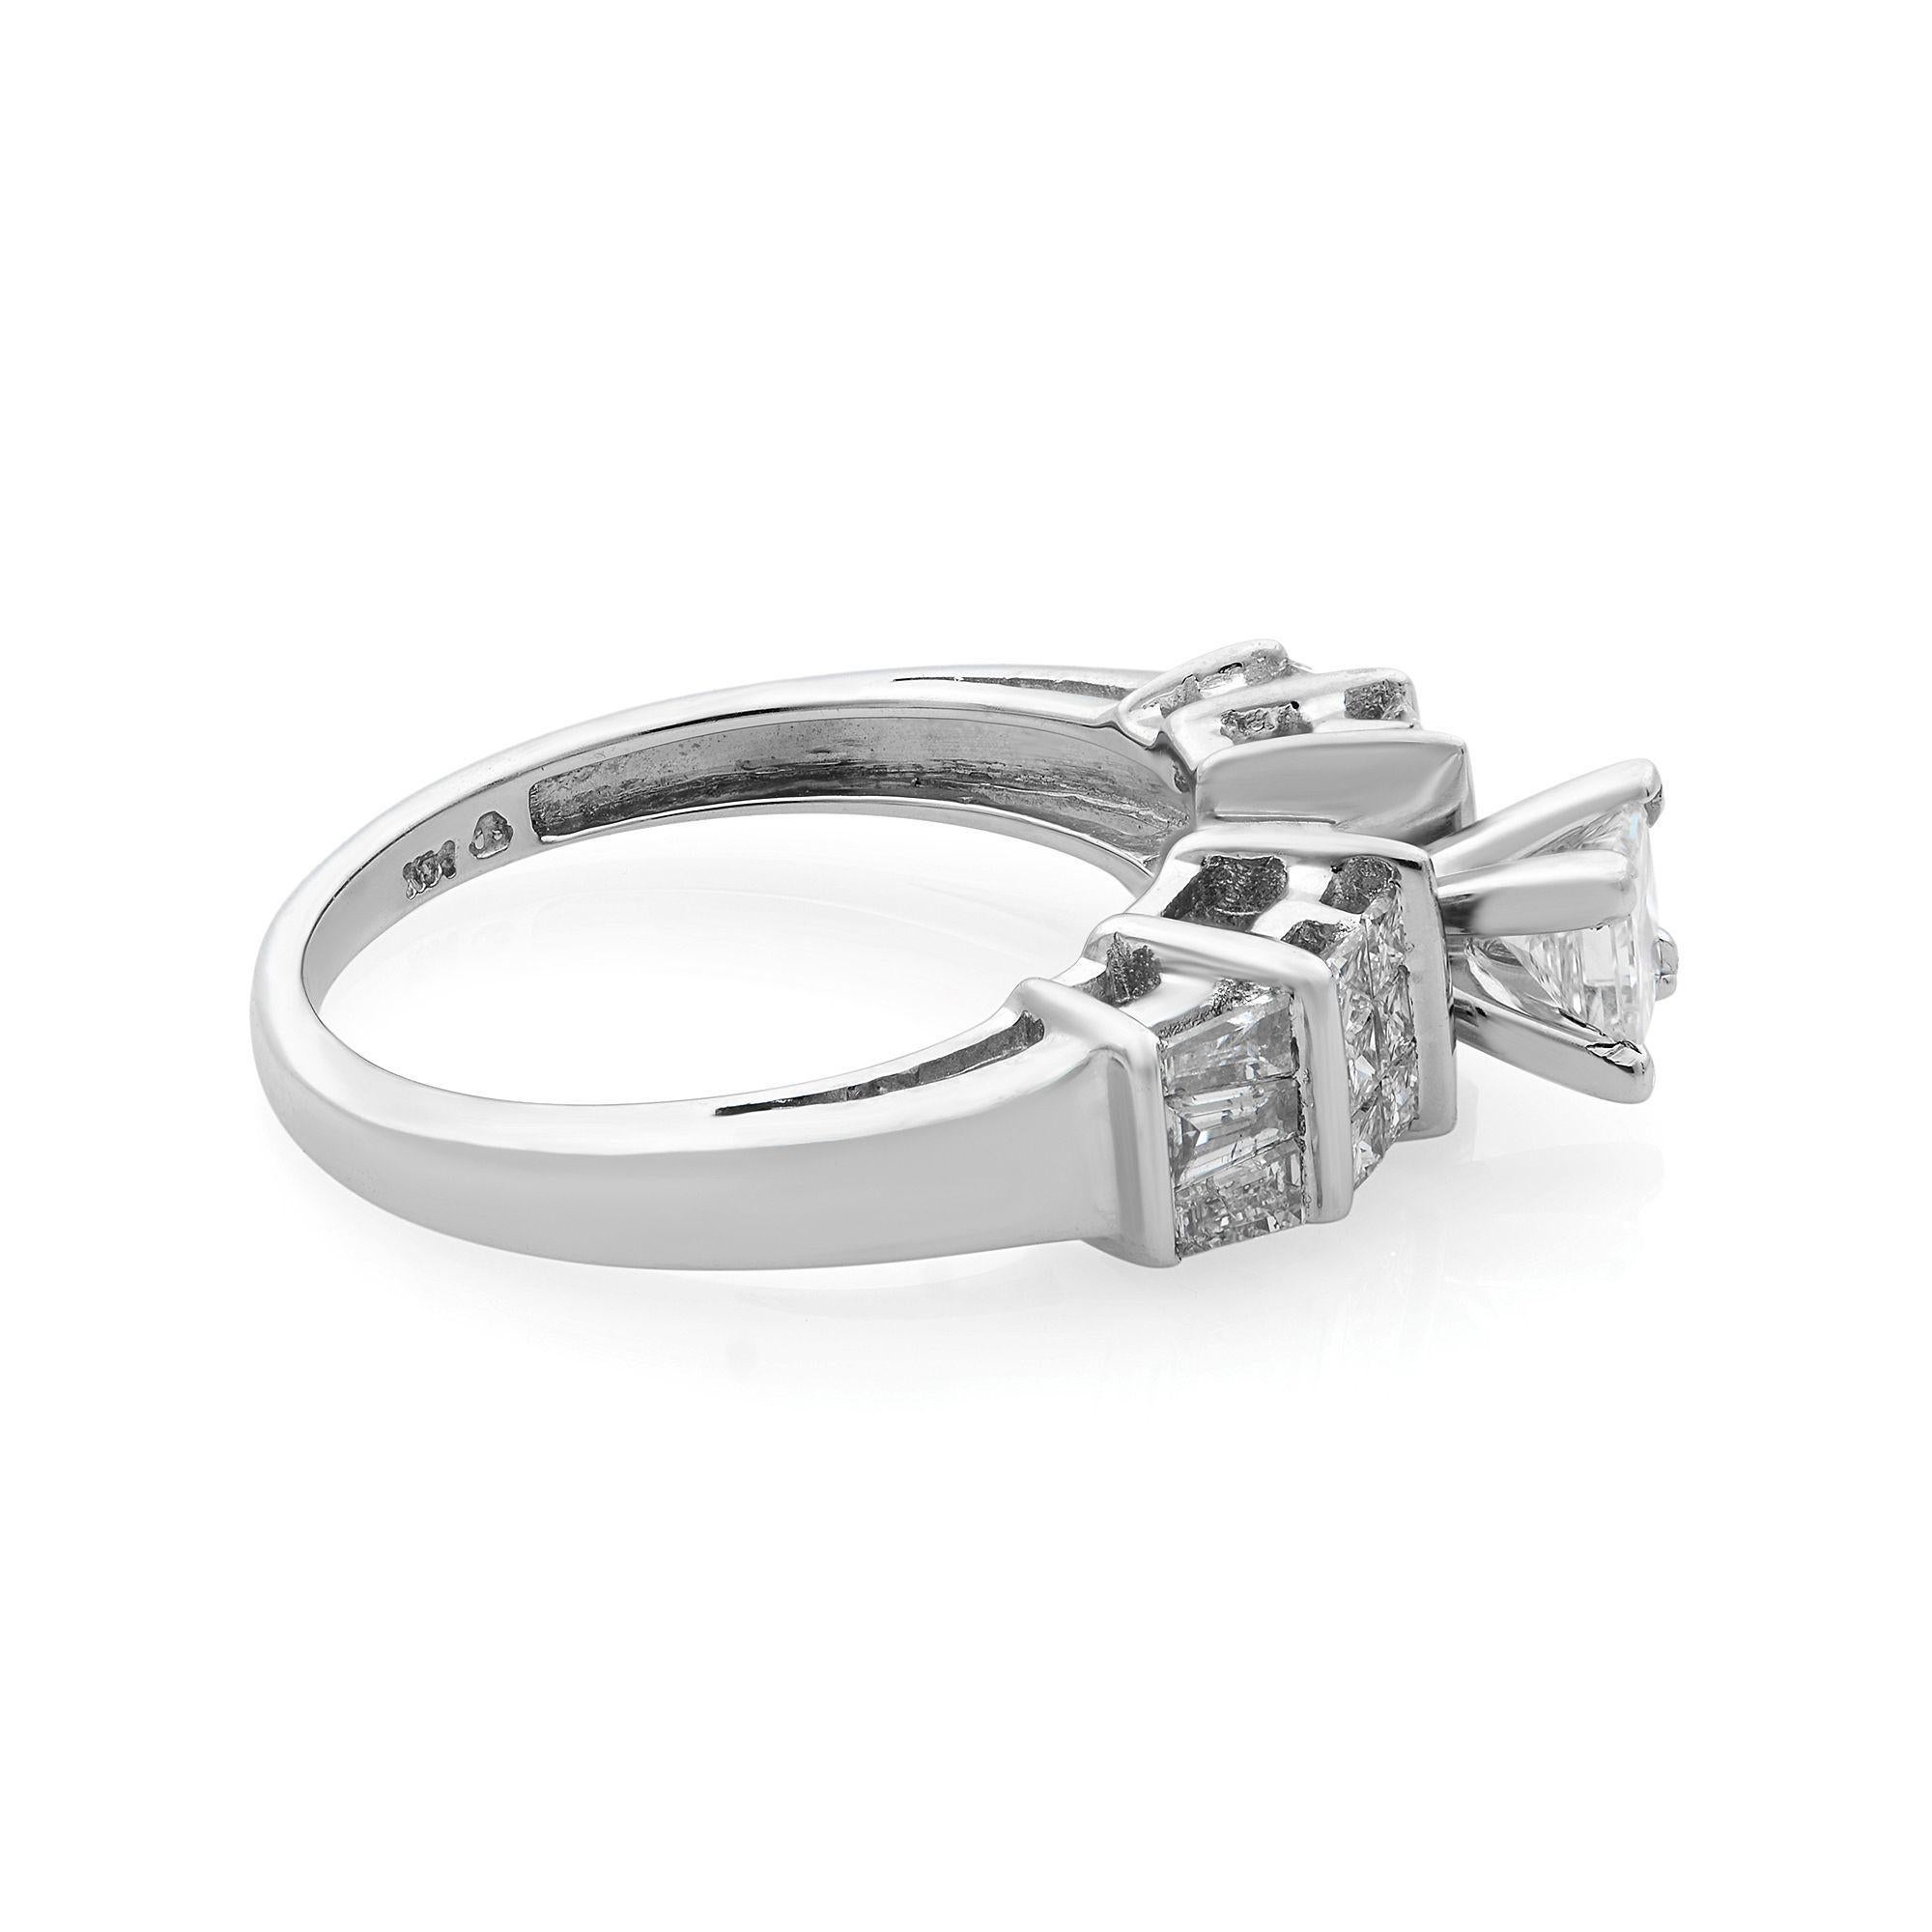 Princess cut diamond engagement ring with baguette cut side stones crafted in 14K white gold. Truly a stunning treasure, the captivating 0.40 princess-cut diamond at the center sparkles brightly in a four-prong setting. Accenting the shine,